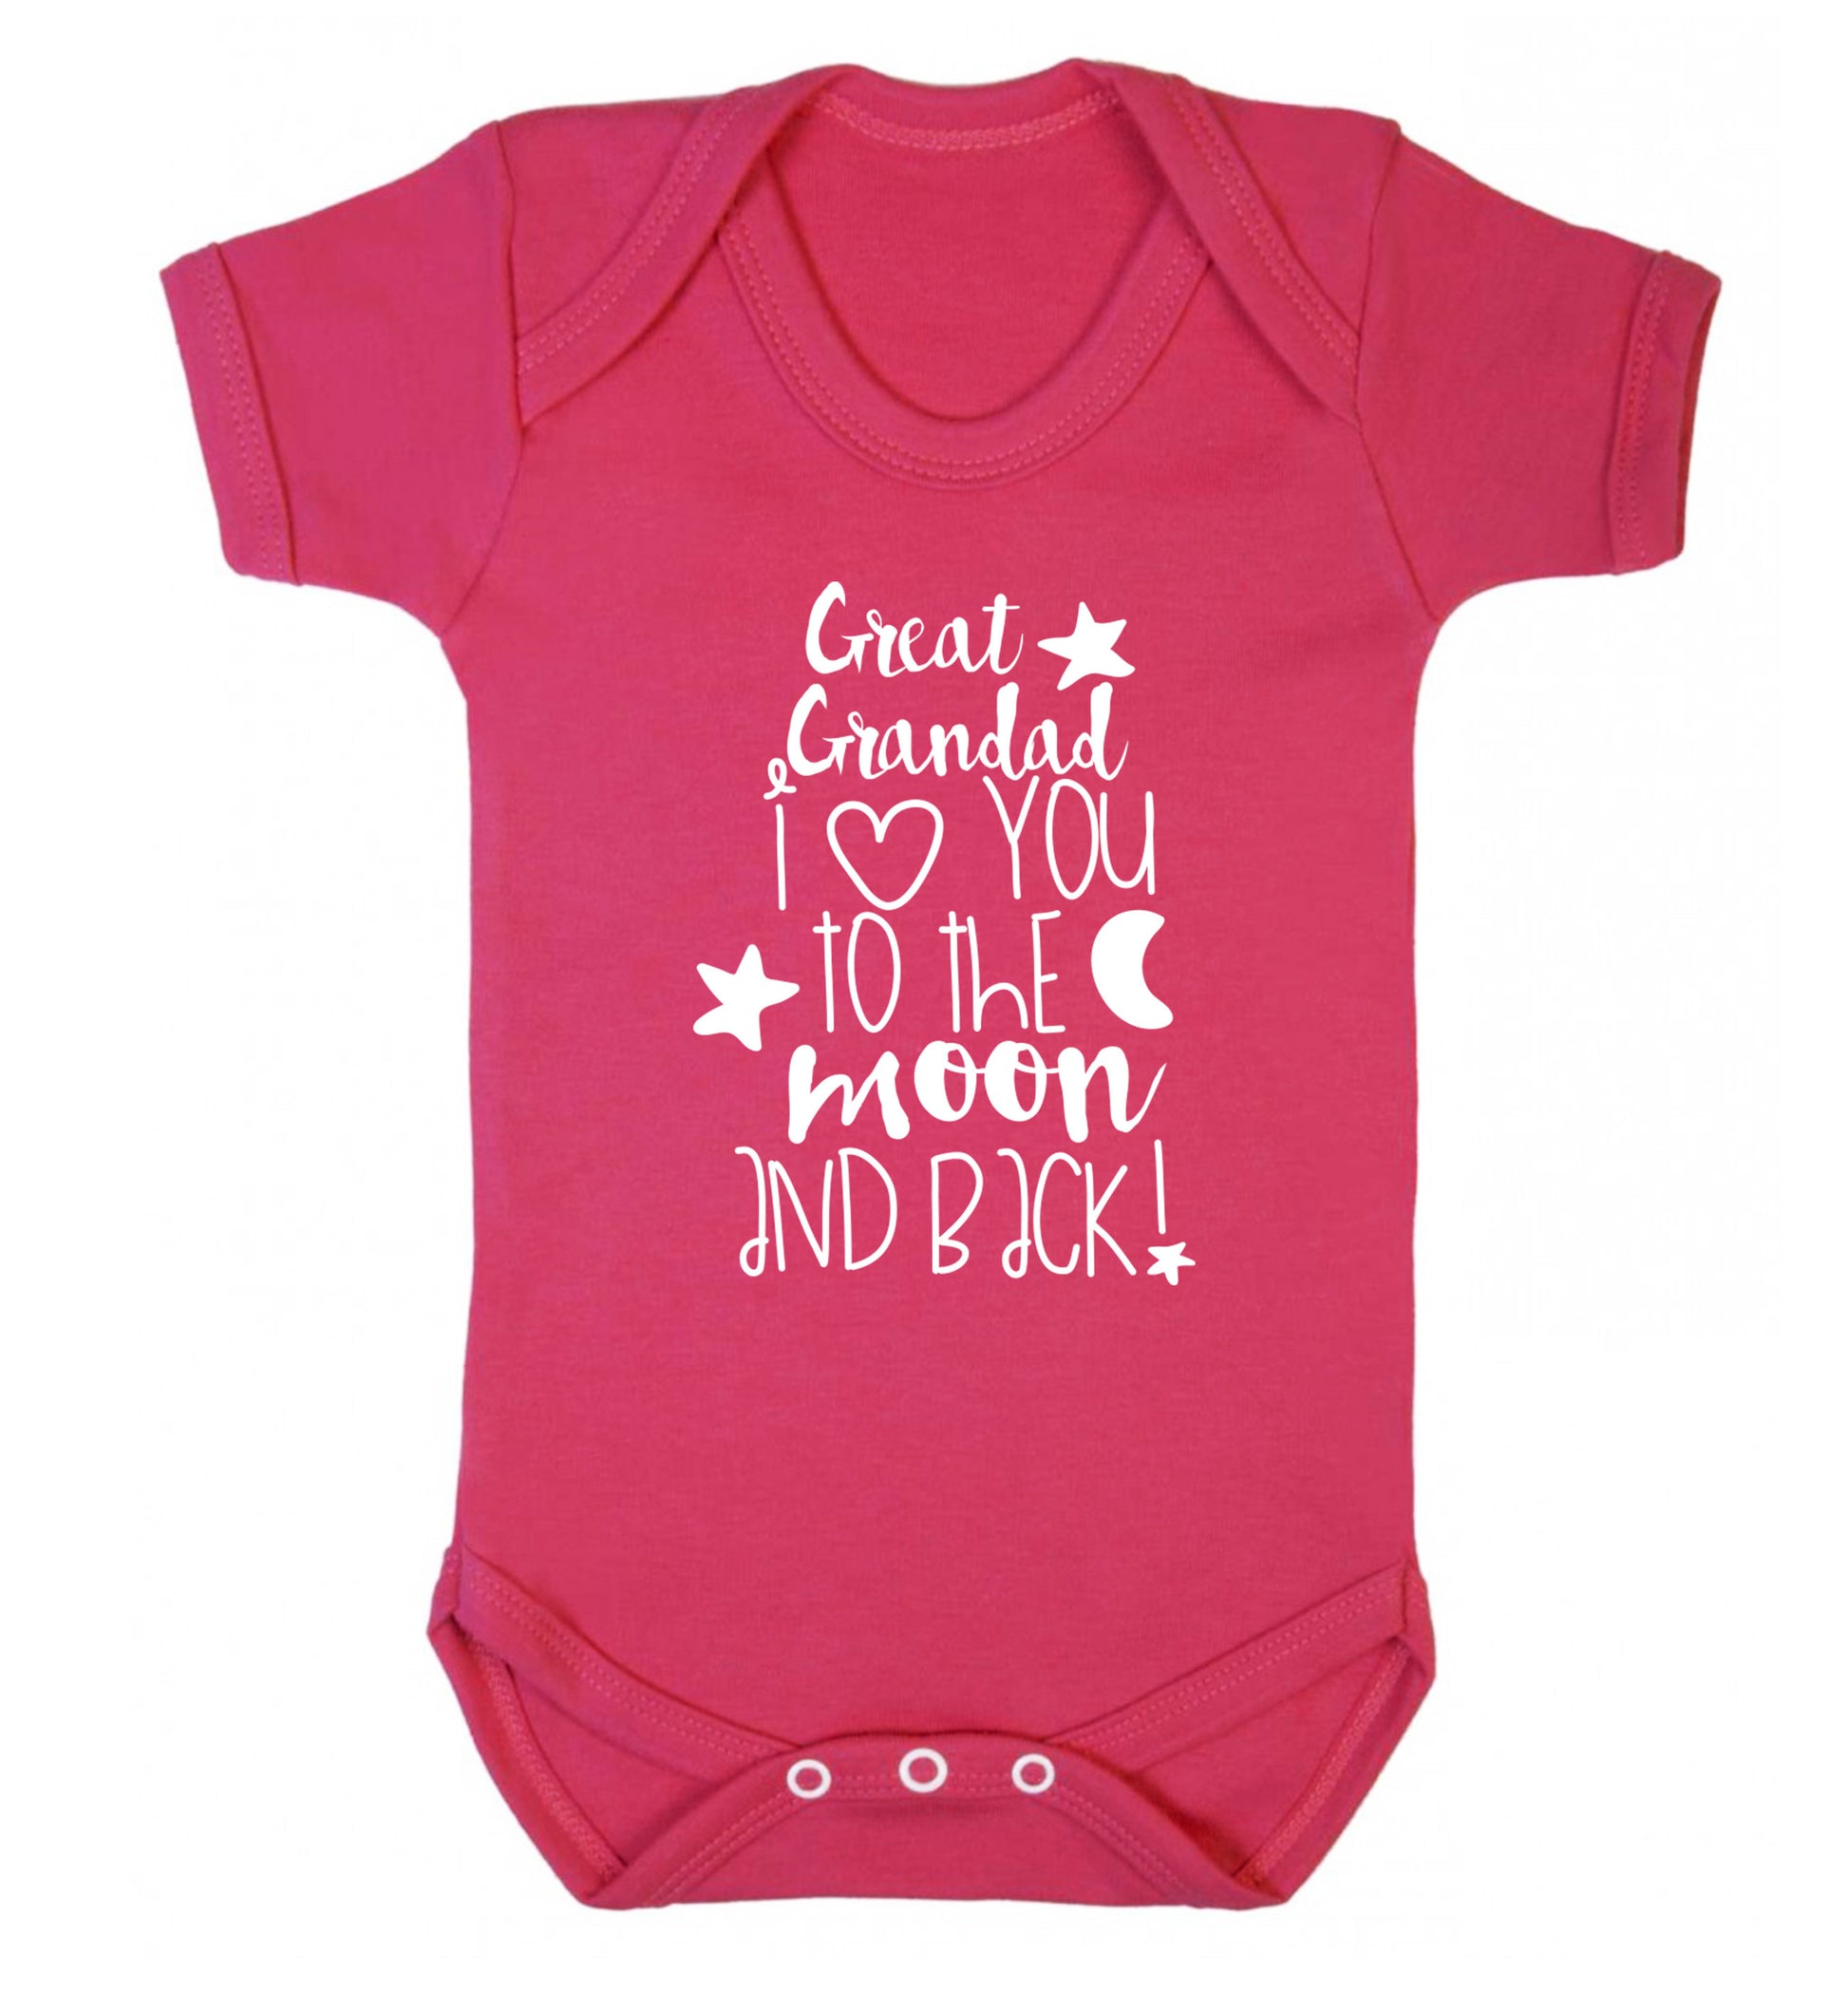 Great Grandad I love you to the moon and back Baby Vest dark pink 18-24 months